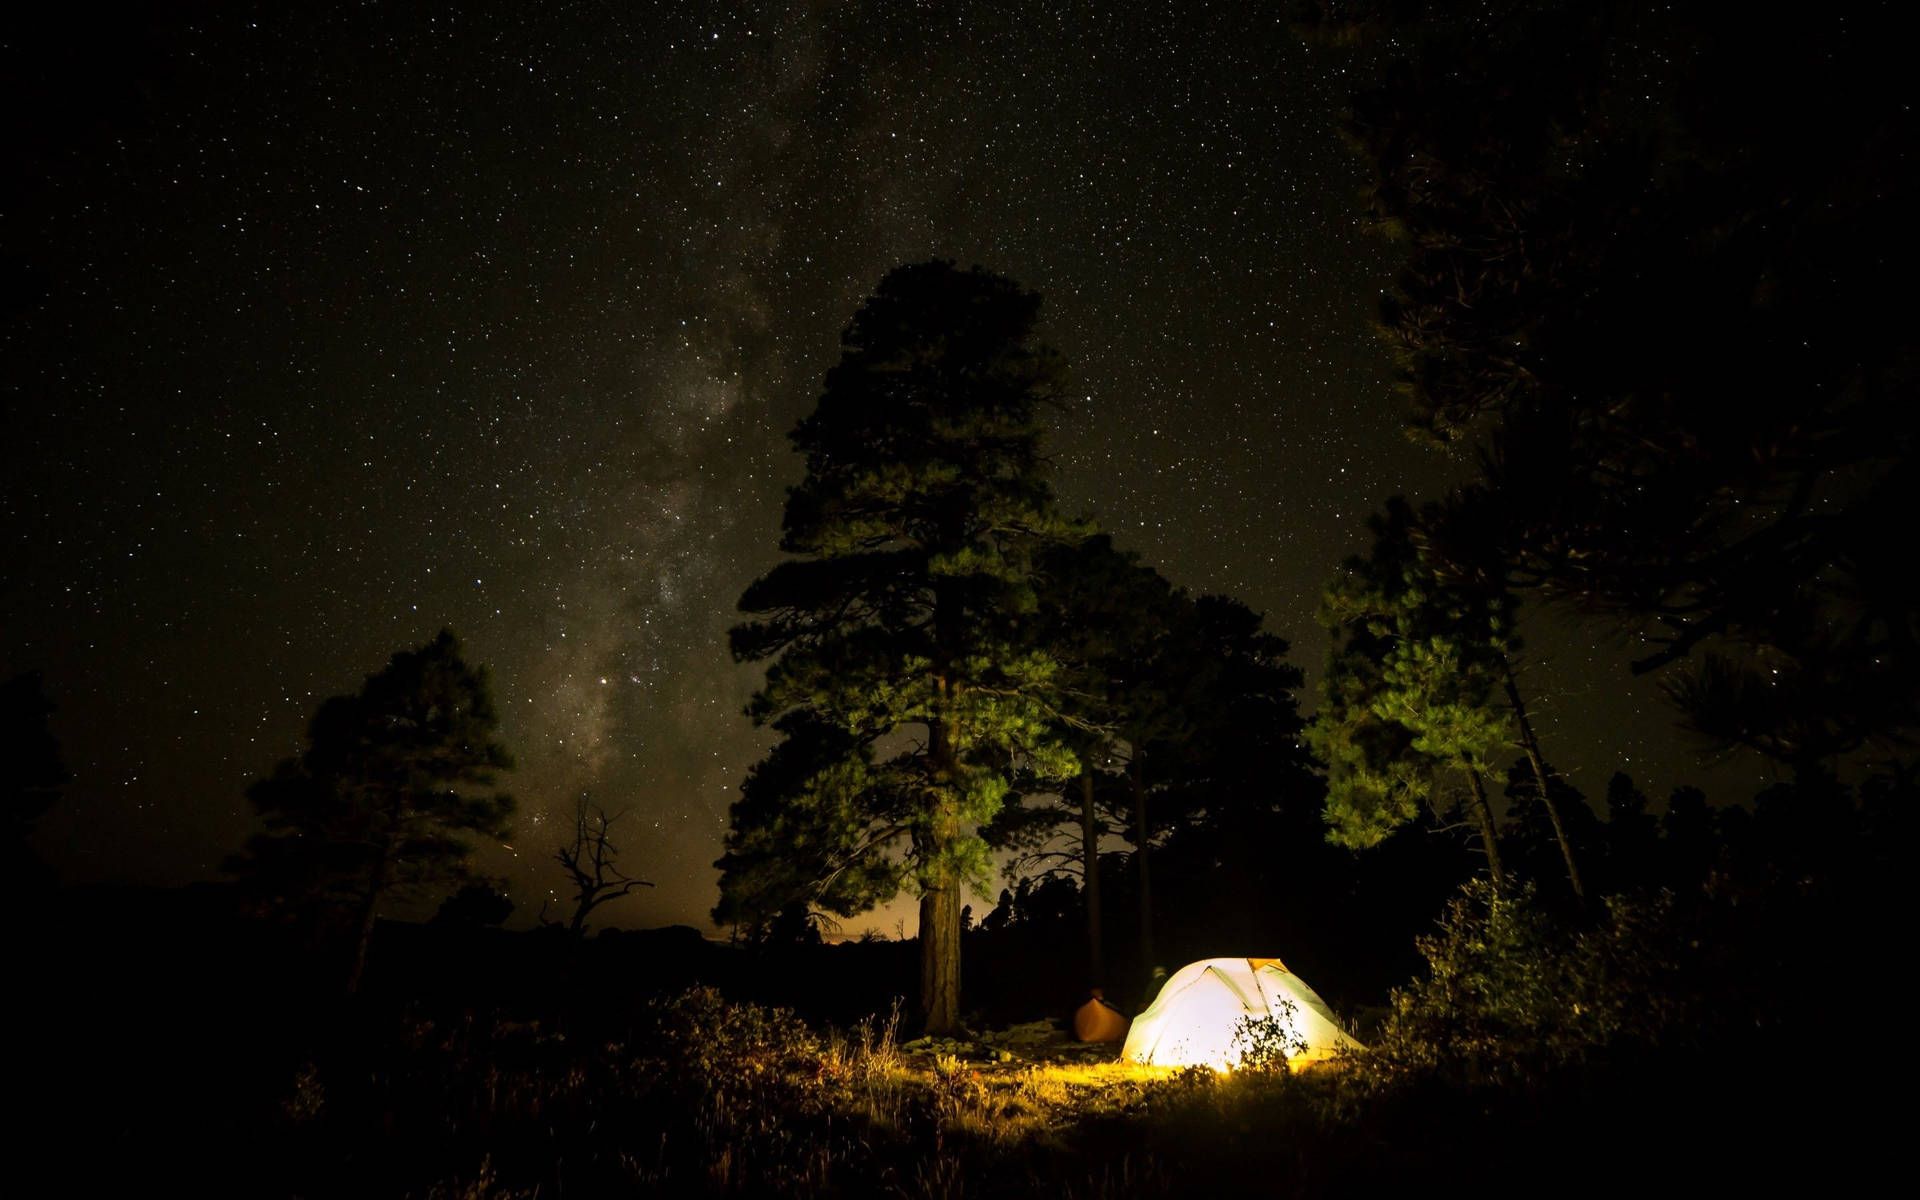 Tent under the stars wallpaper 1920x1200 - Camping